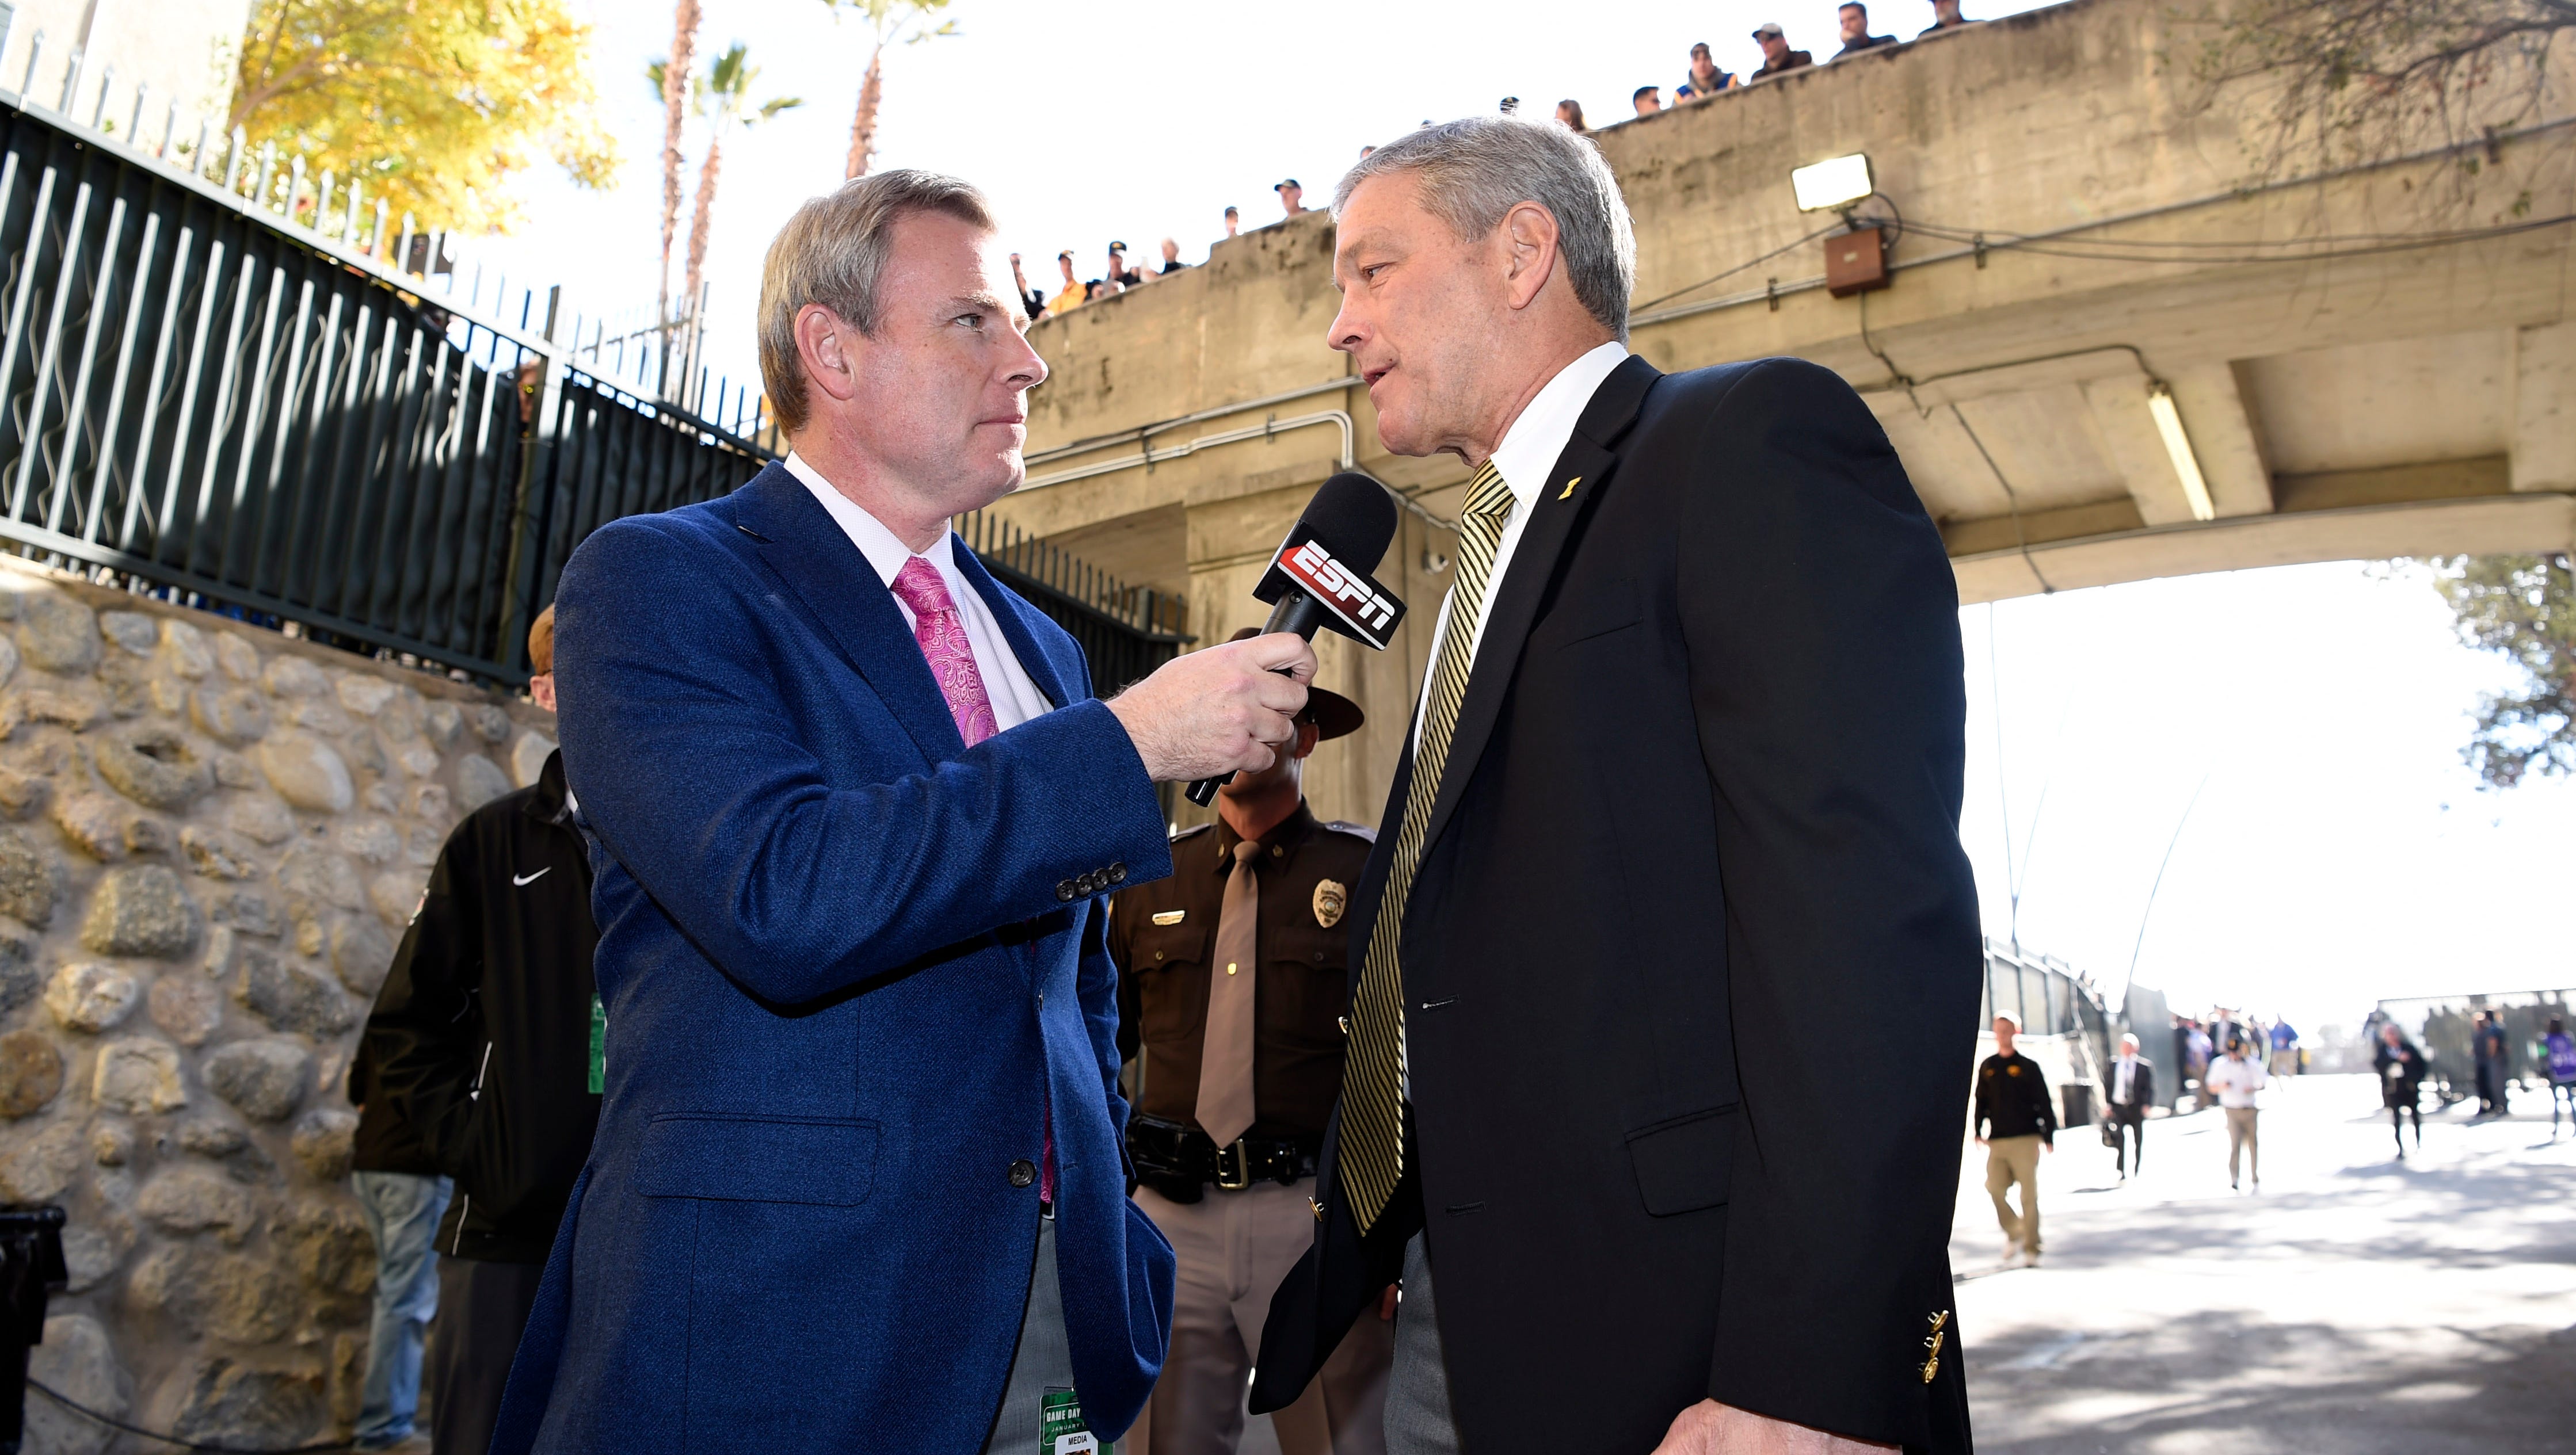 ESPN reporter Tom Rinaldi interviews Iowa Hawkeyes head coach Kirk Ferentz before the game between the Iowa Hawkeyes and the Stanford Cardinal in the 2016 Rose Bowl at Rose Bowl.